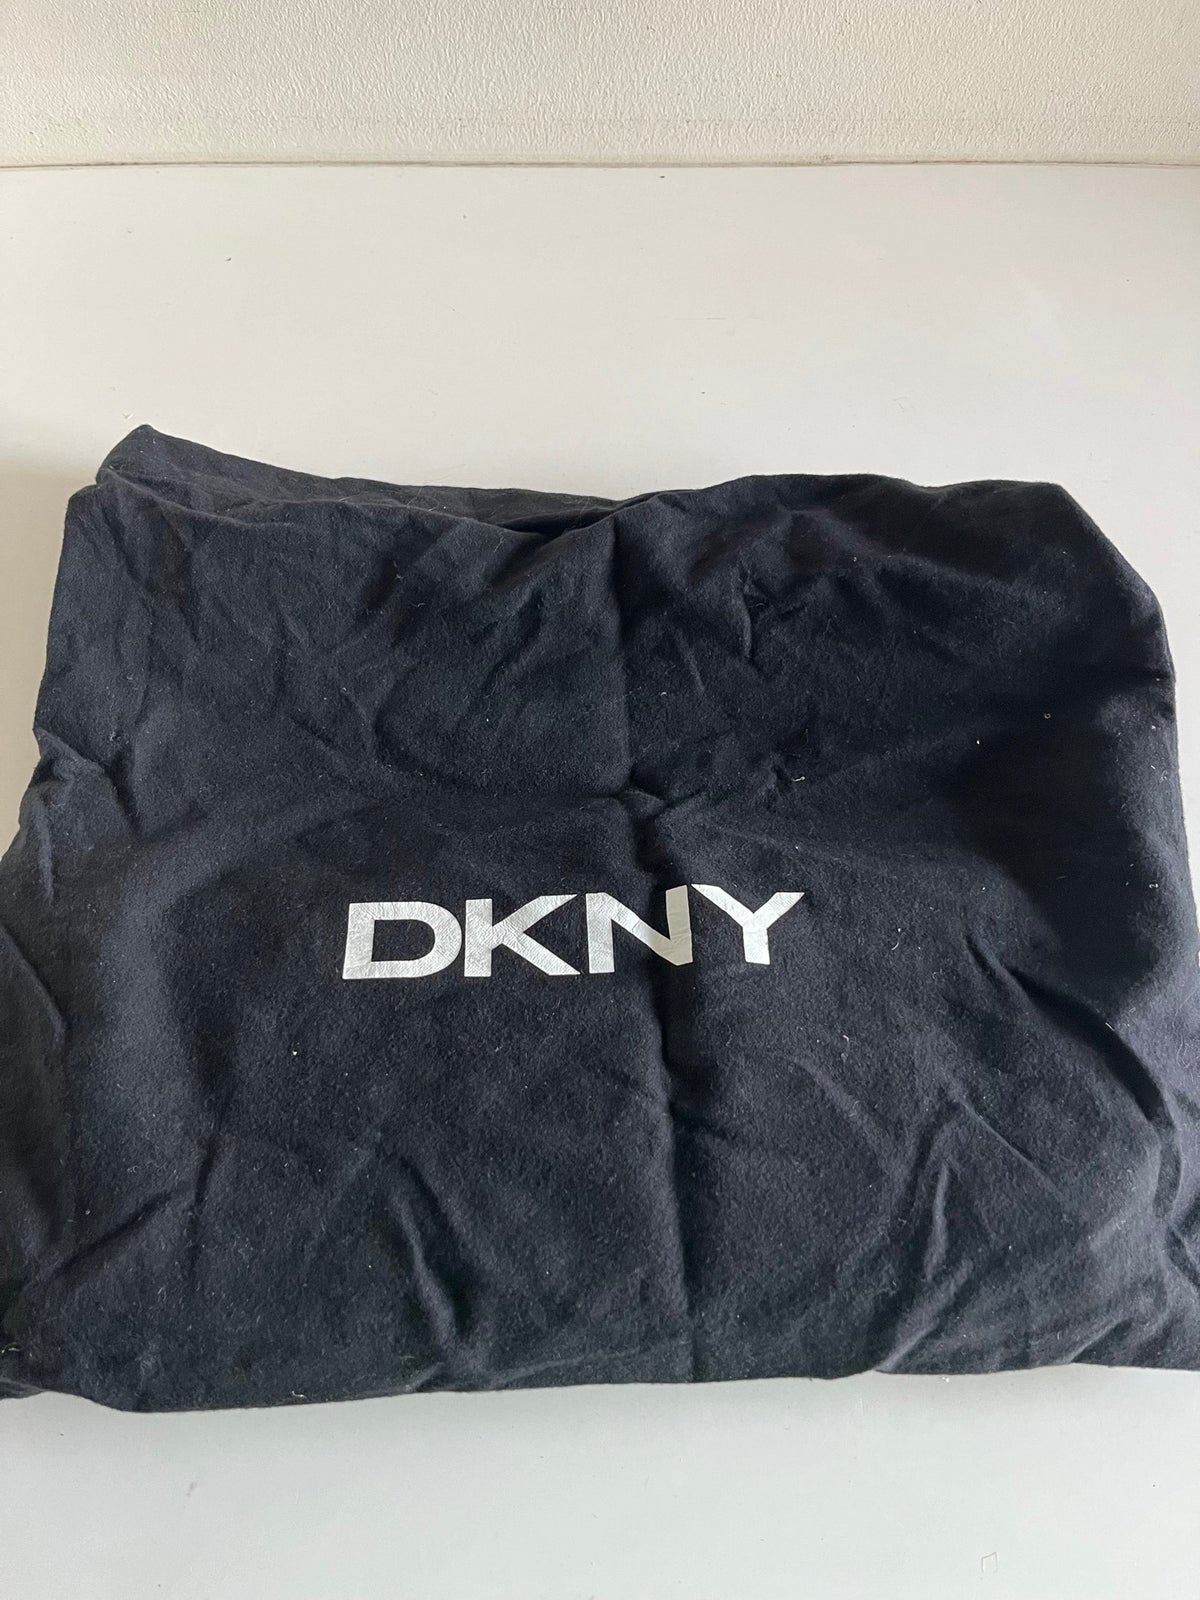 Clutch, DKNY, andet materiale